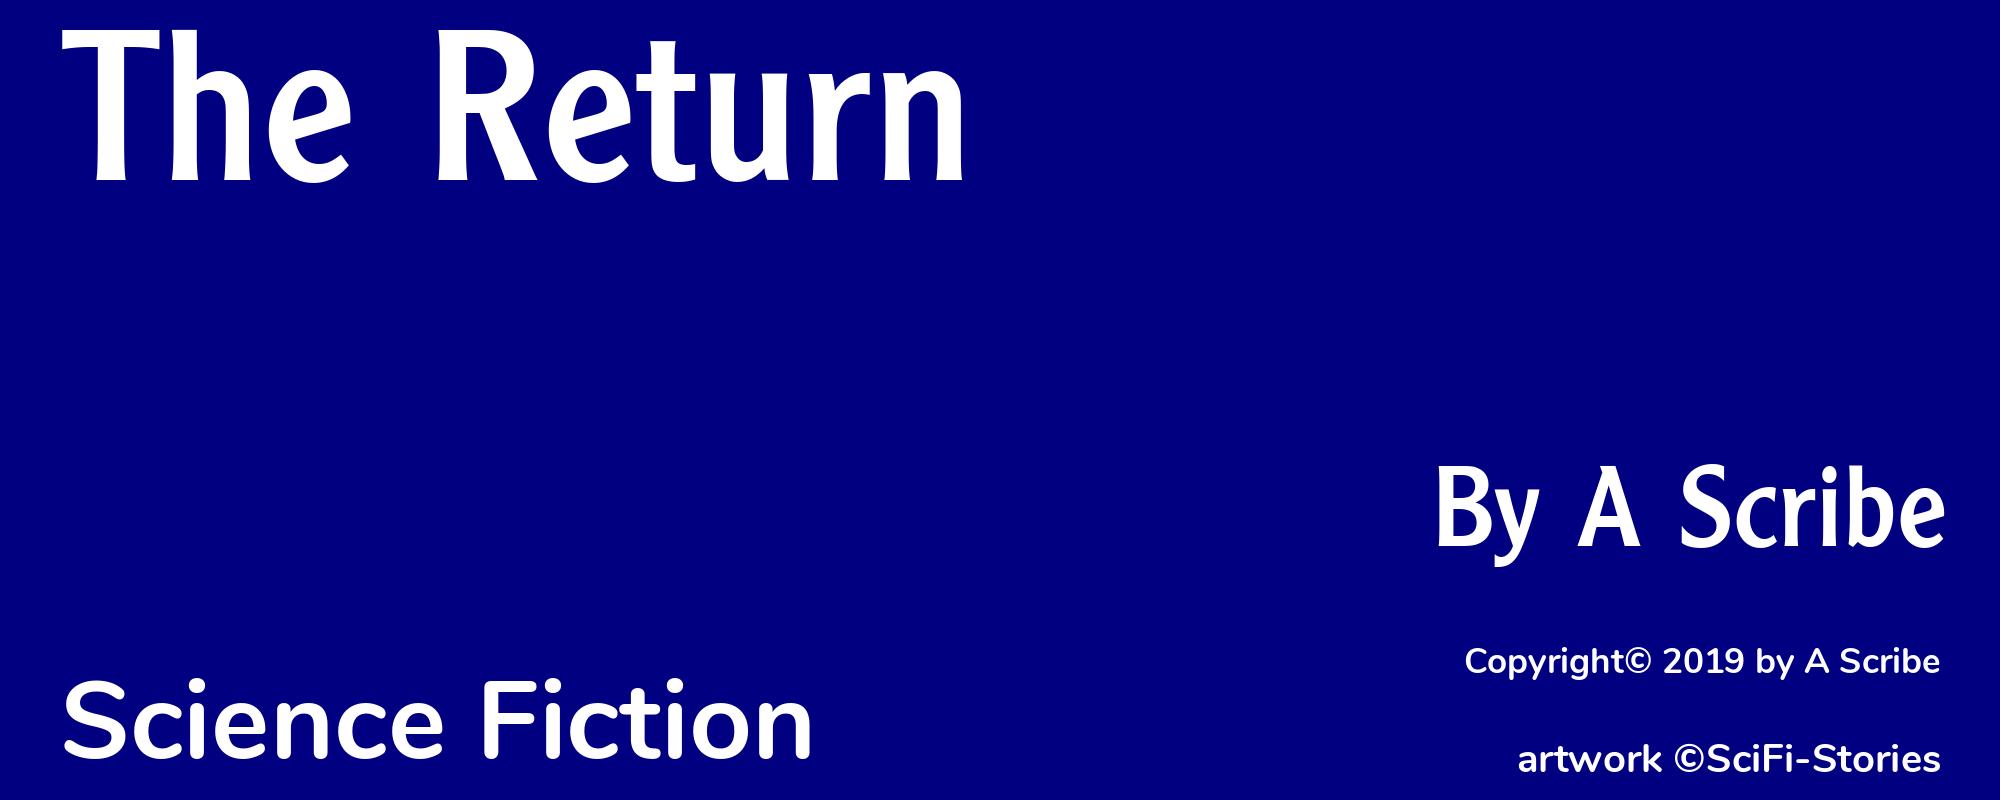 The Return - Cover